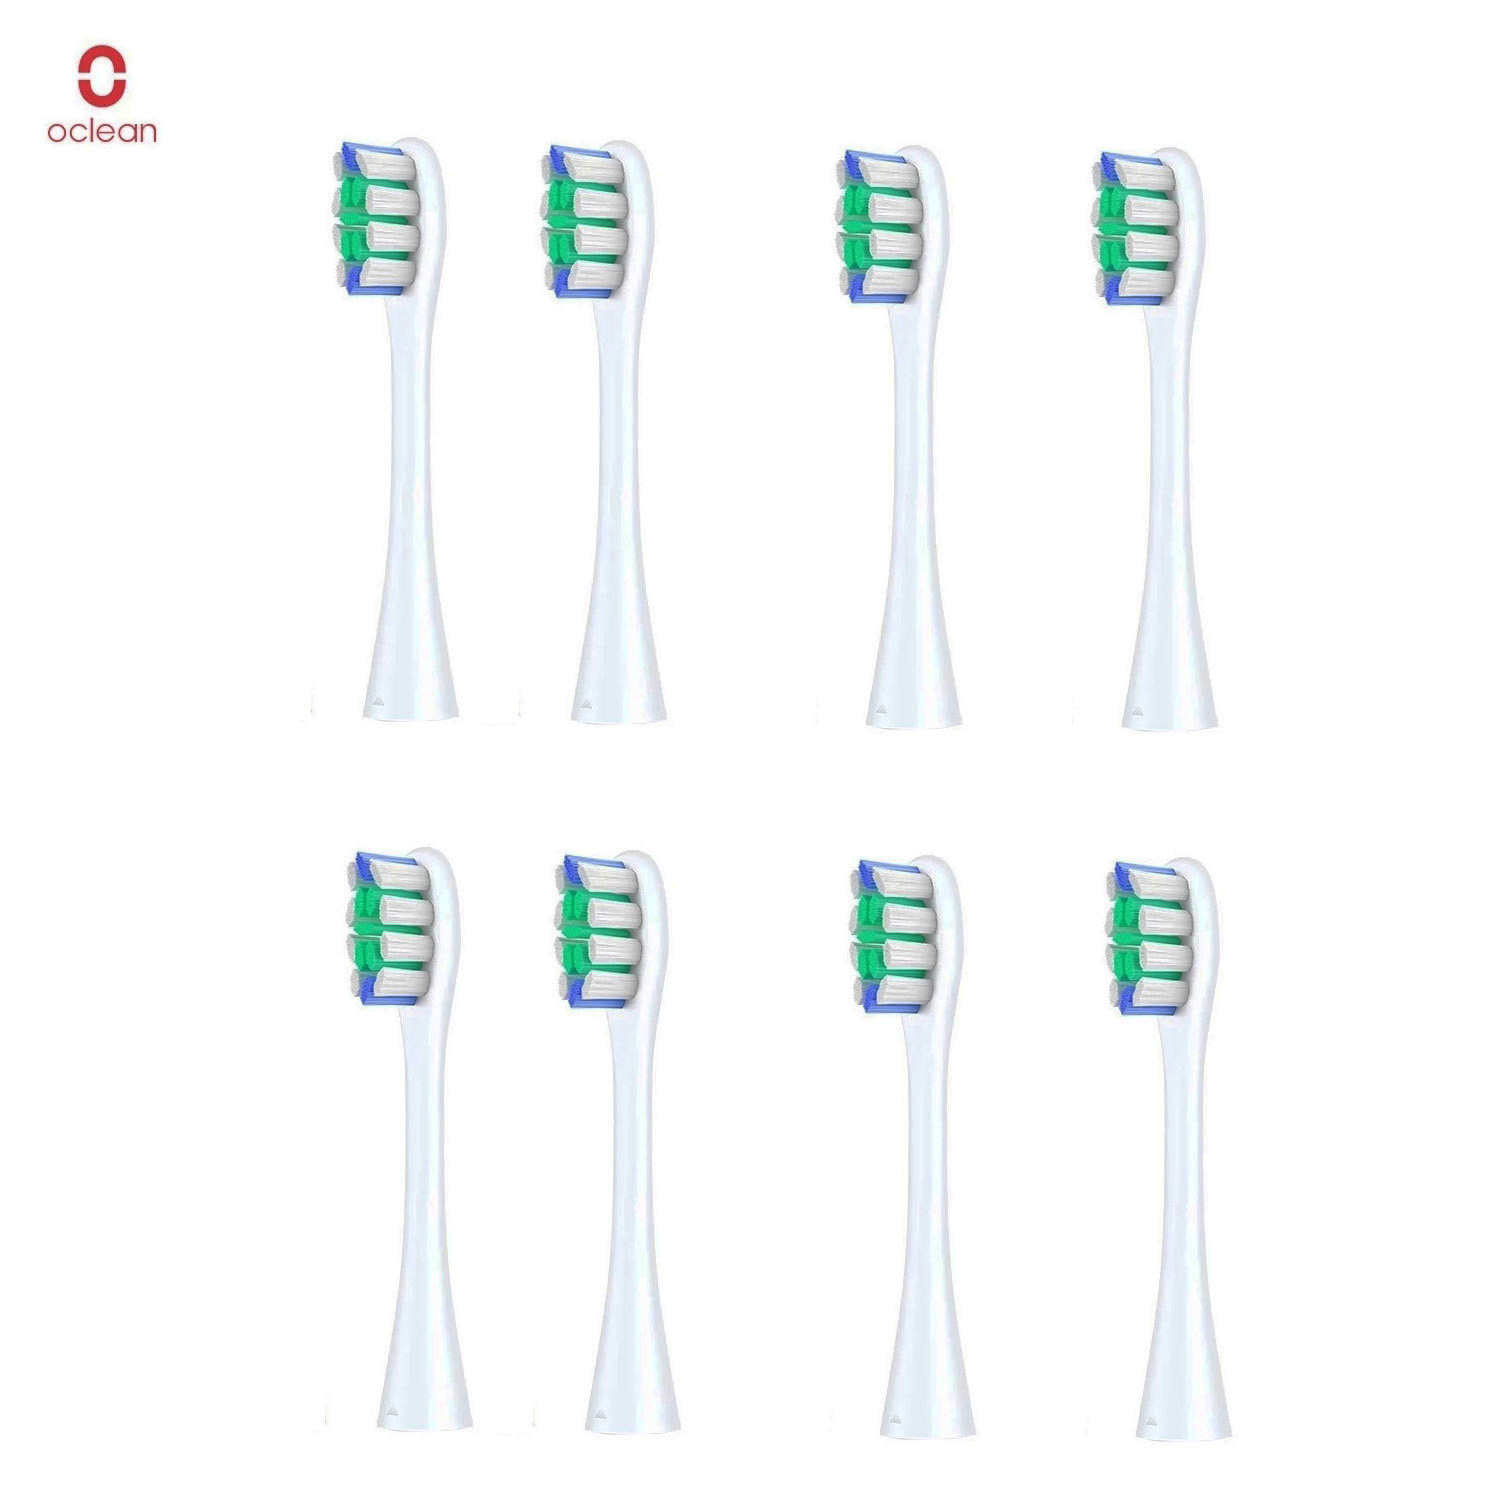 8PCS Oclean P2 Replacement Brush Head Single Pack Suitable for Oclean Elite/X Pro/X/One Universal Replacement Brush Head